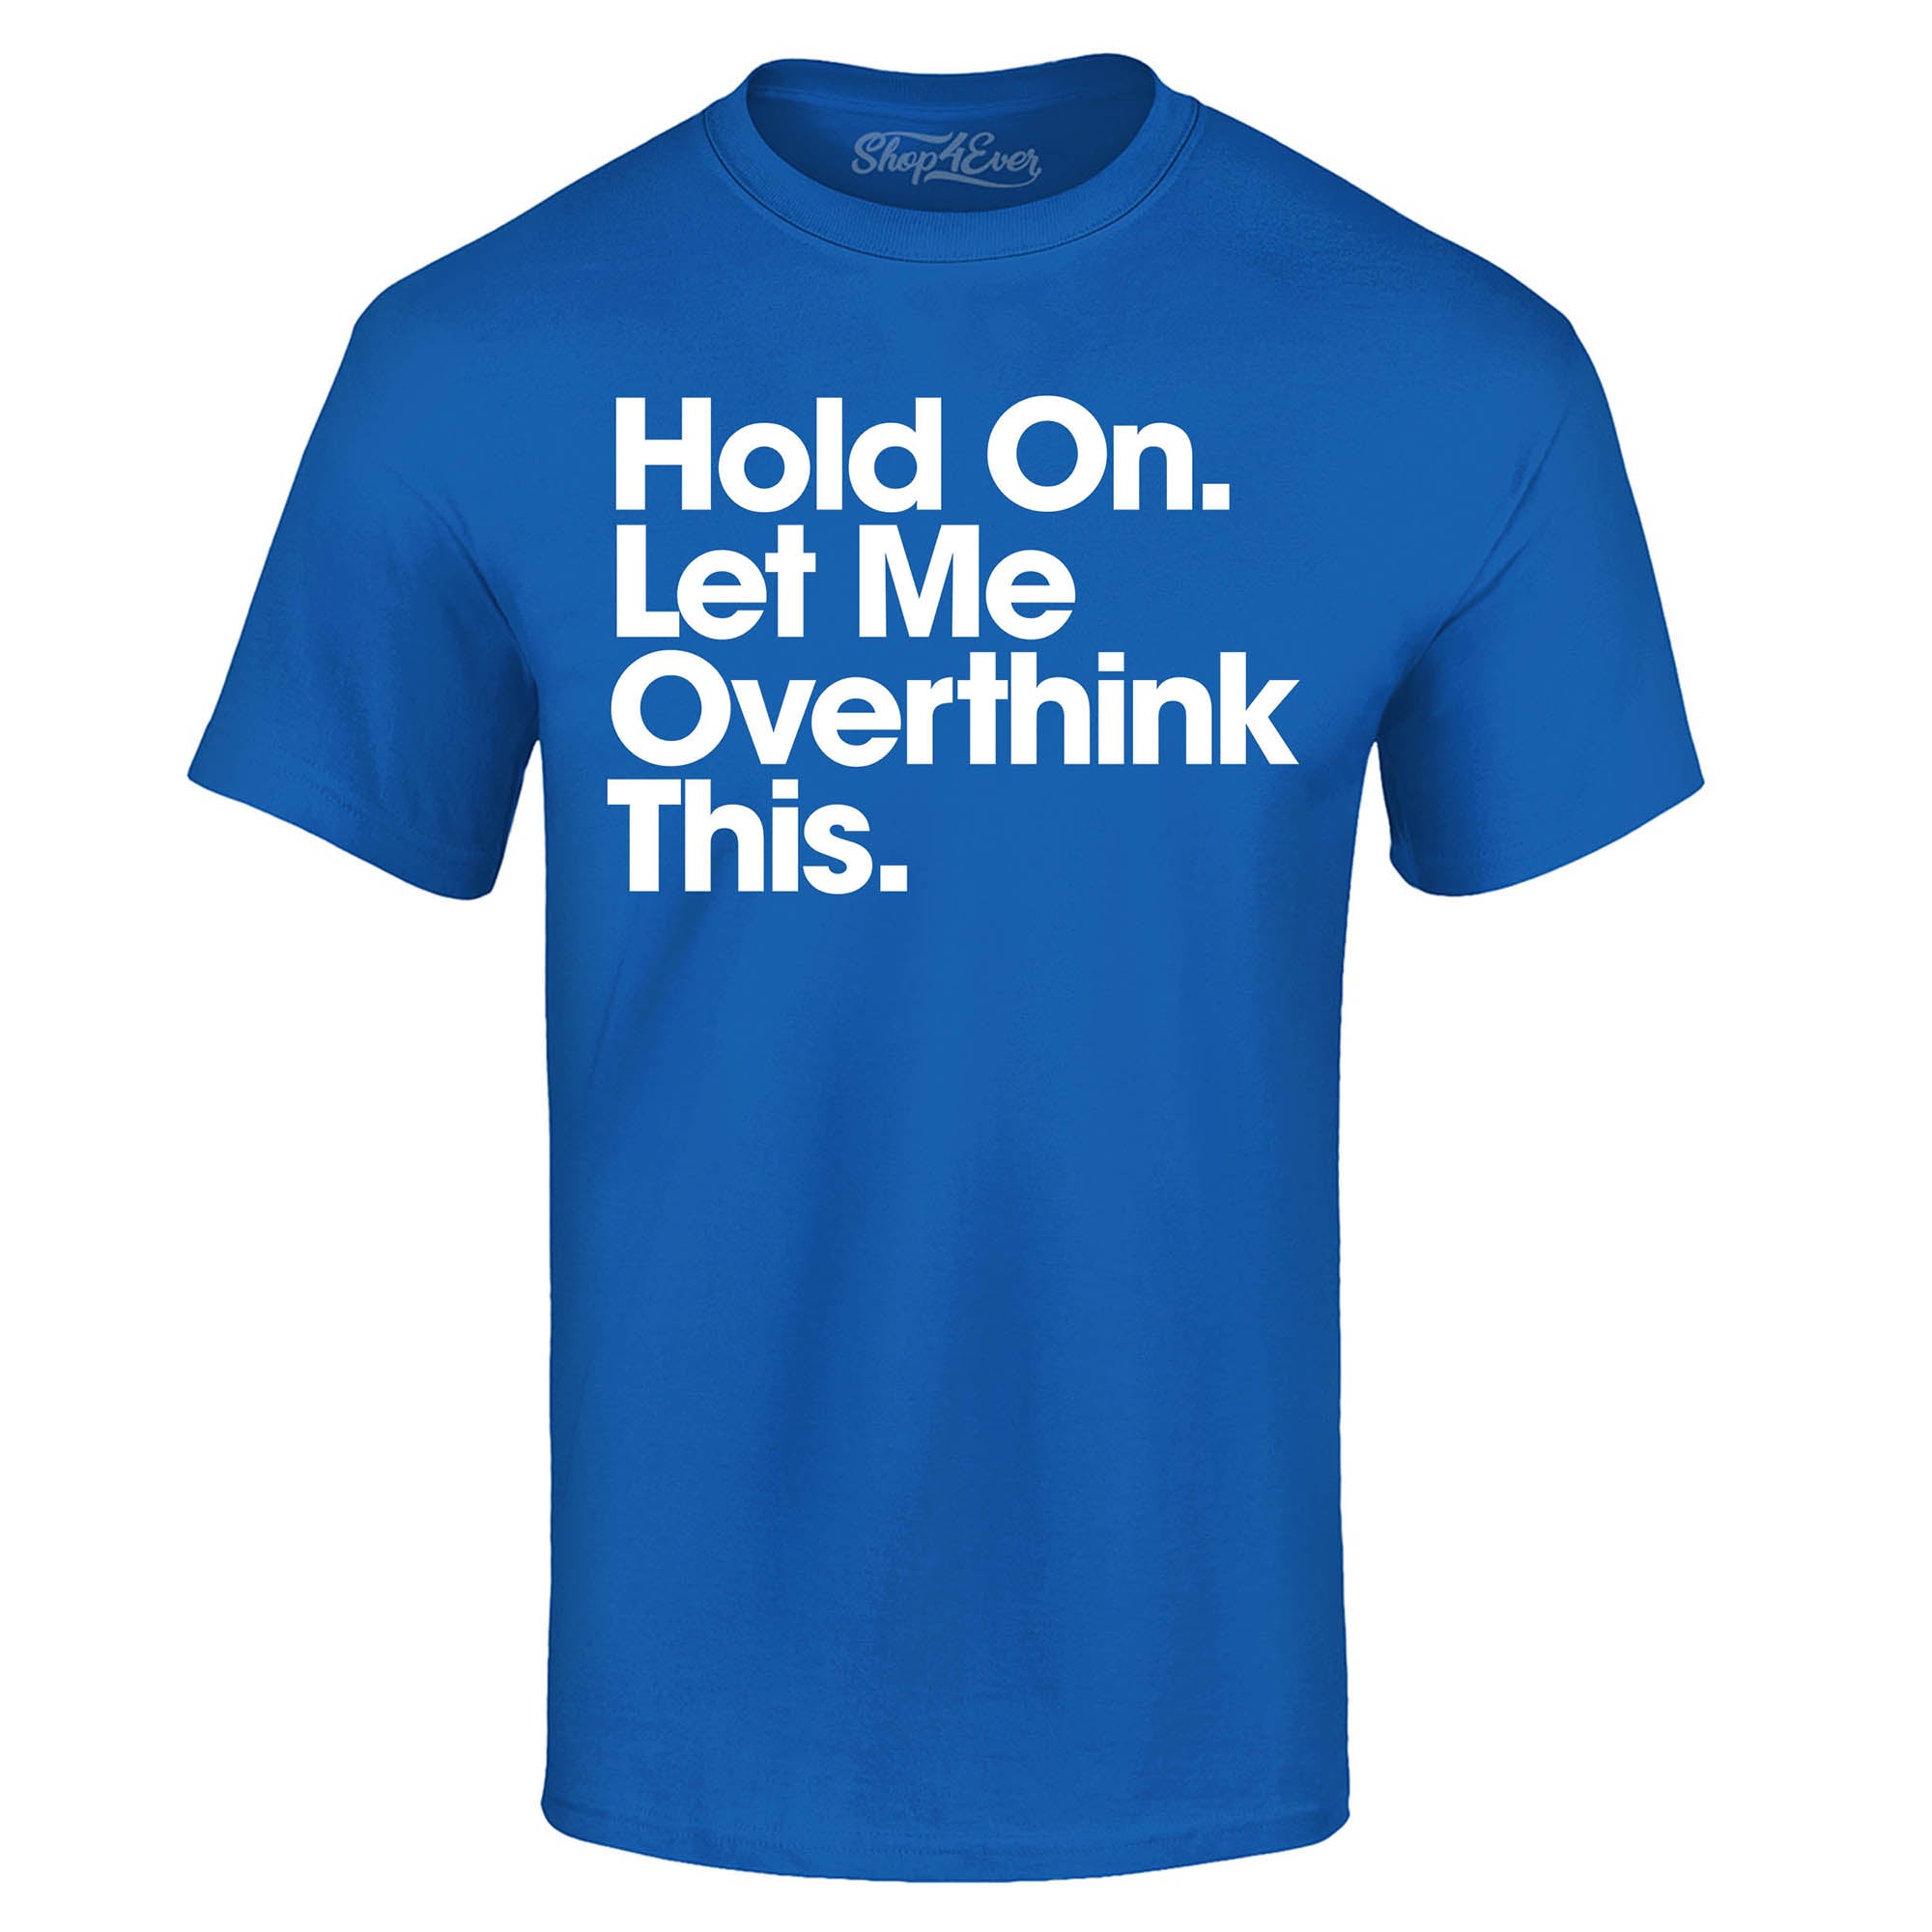 Hold On. Let Me Overthink This. T-Shirt